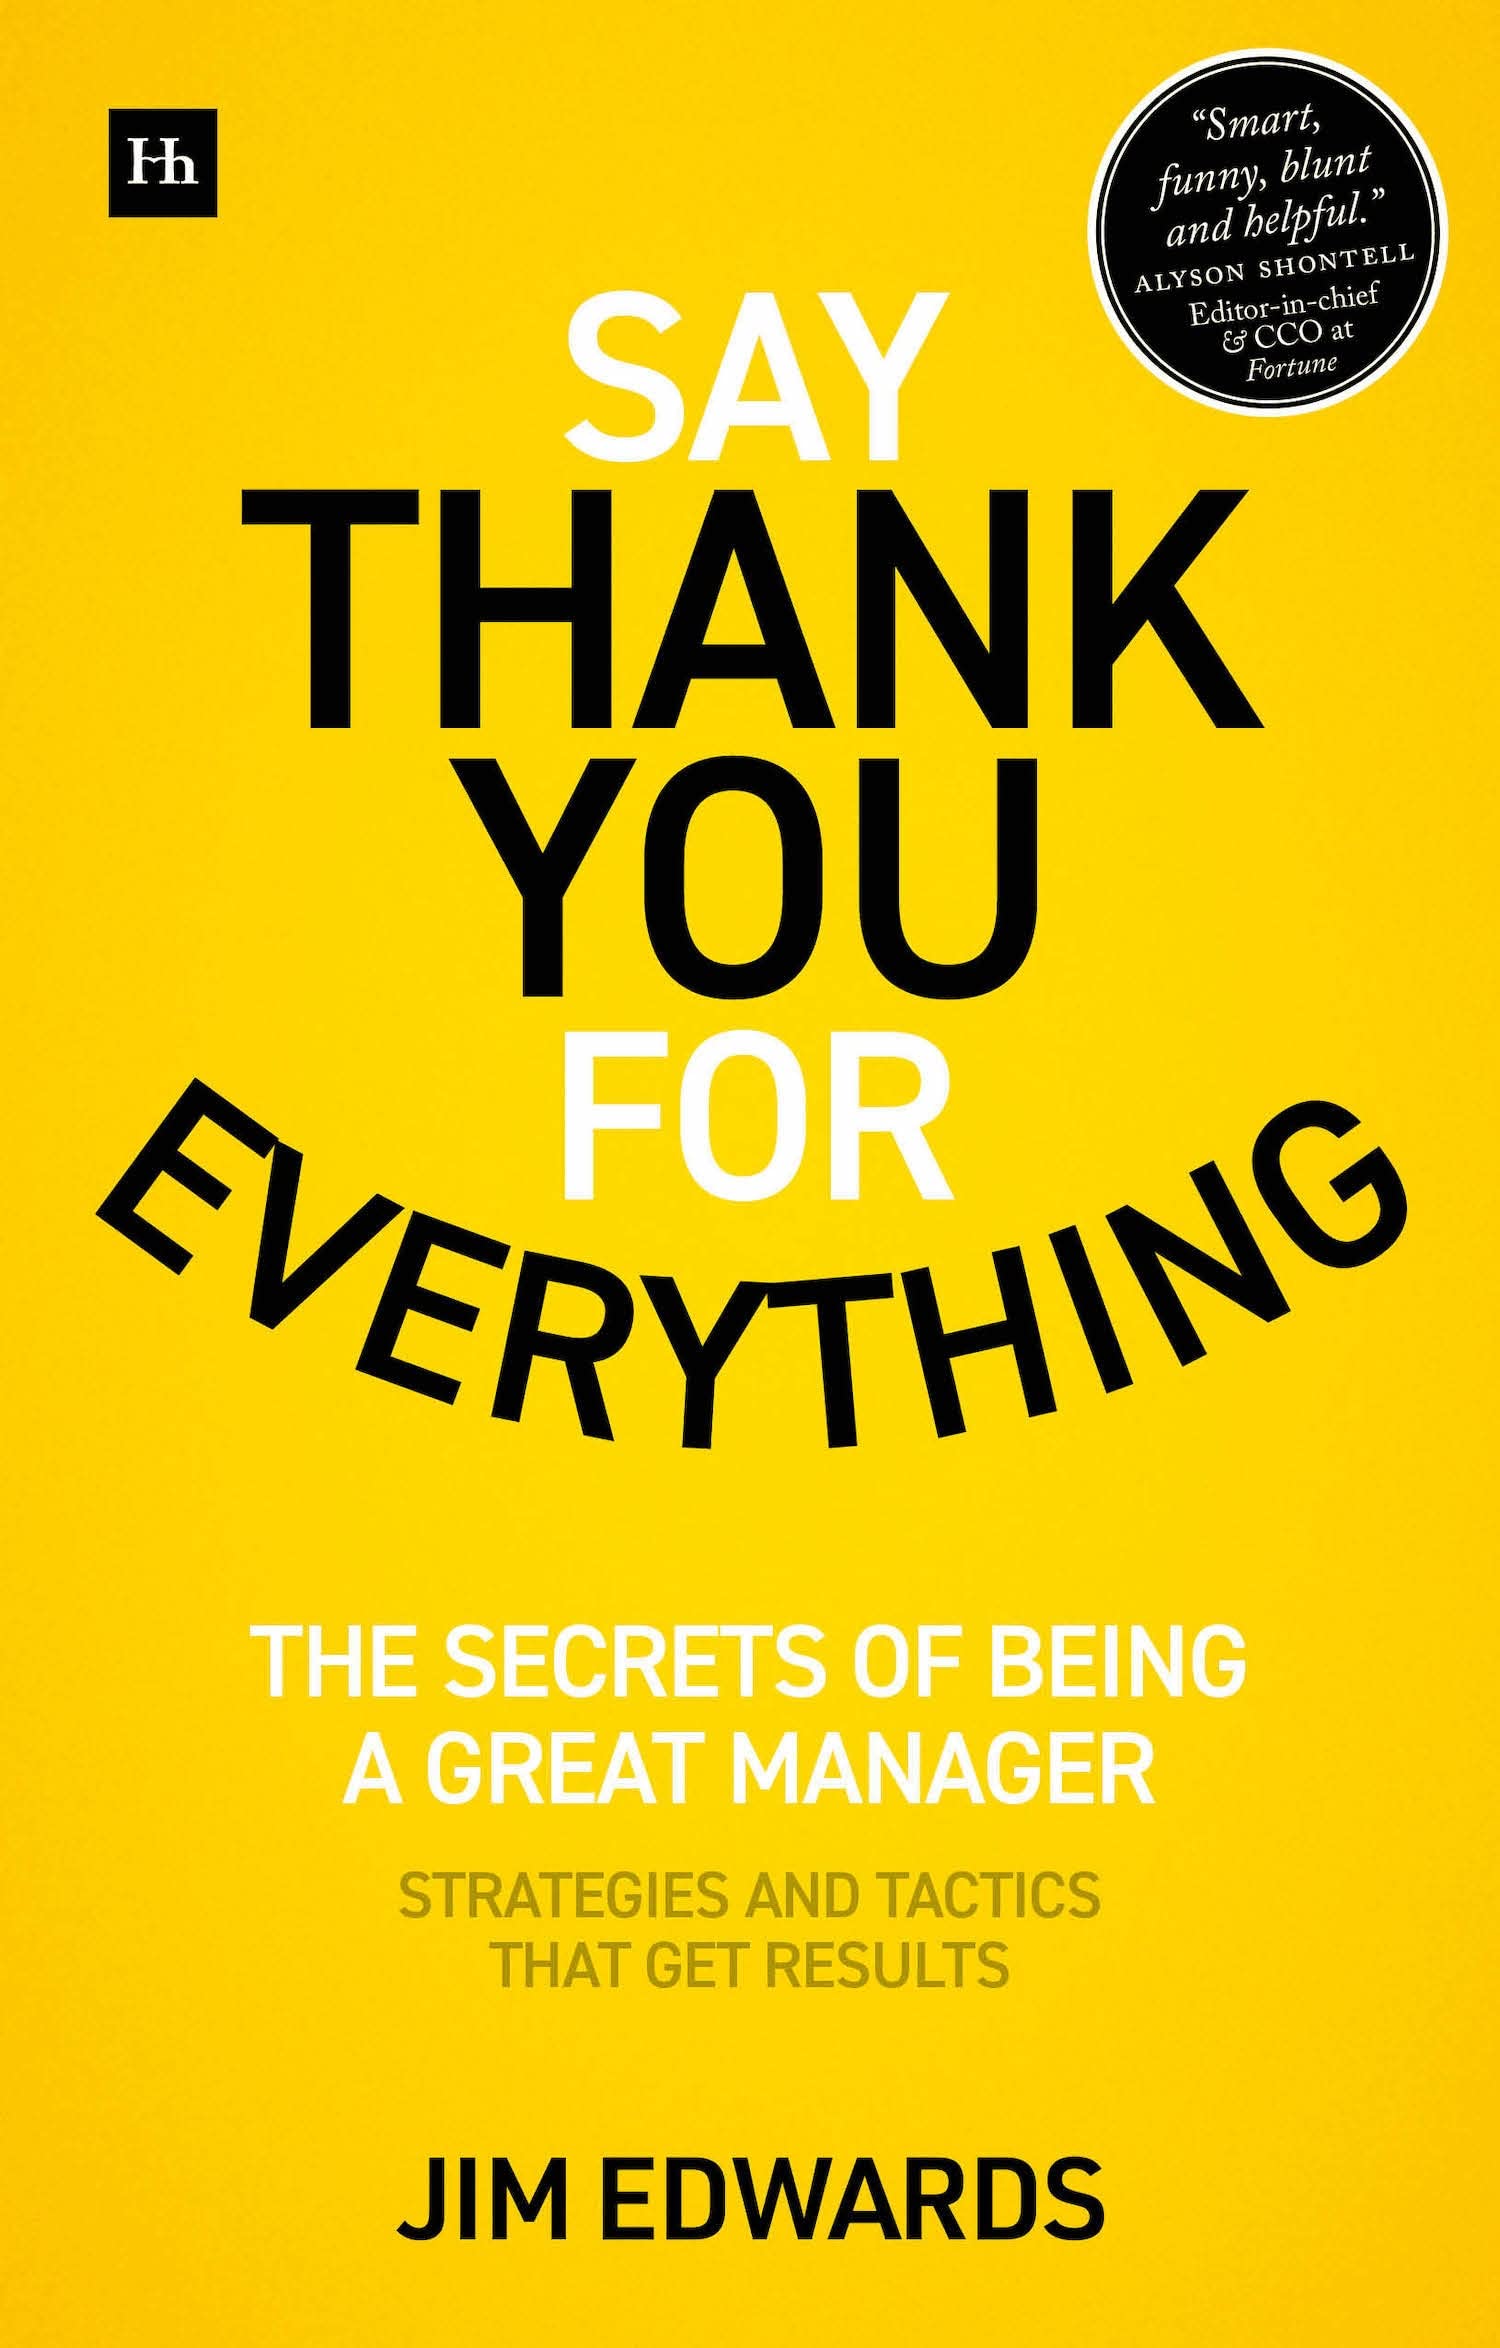 Thank　The　that　Say　for　You　secrets　great　and　tactics　manager　Everything:　of　results　a　being　get　strategies　BookPal